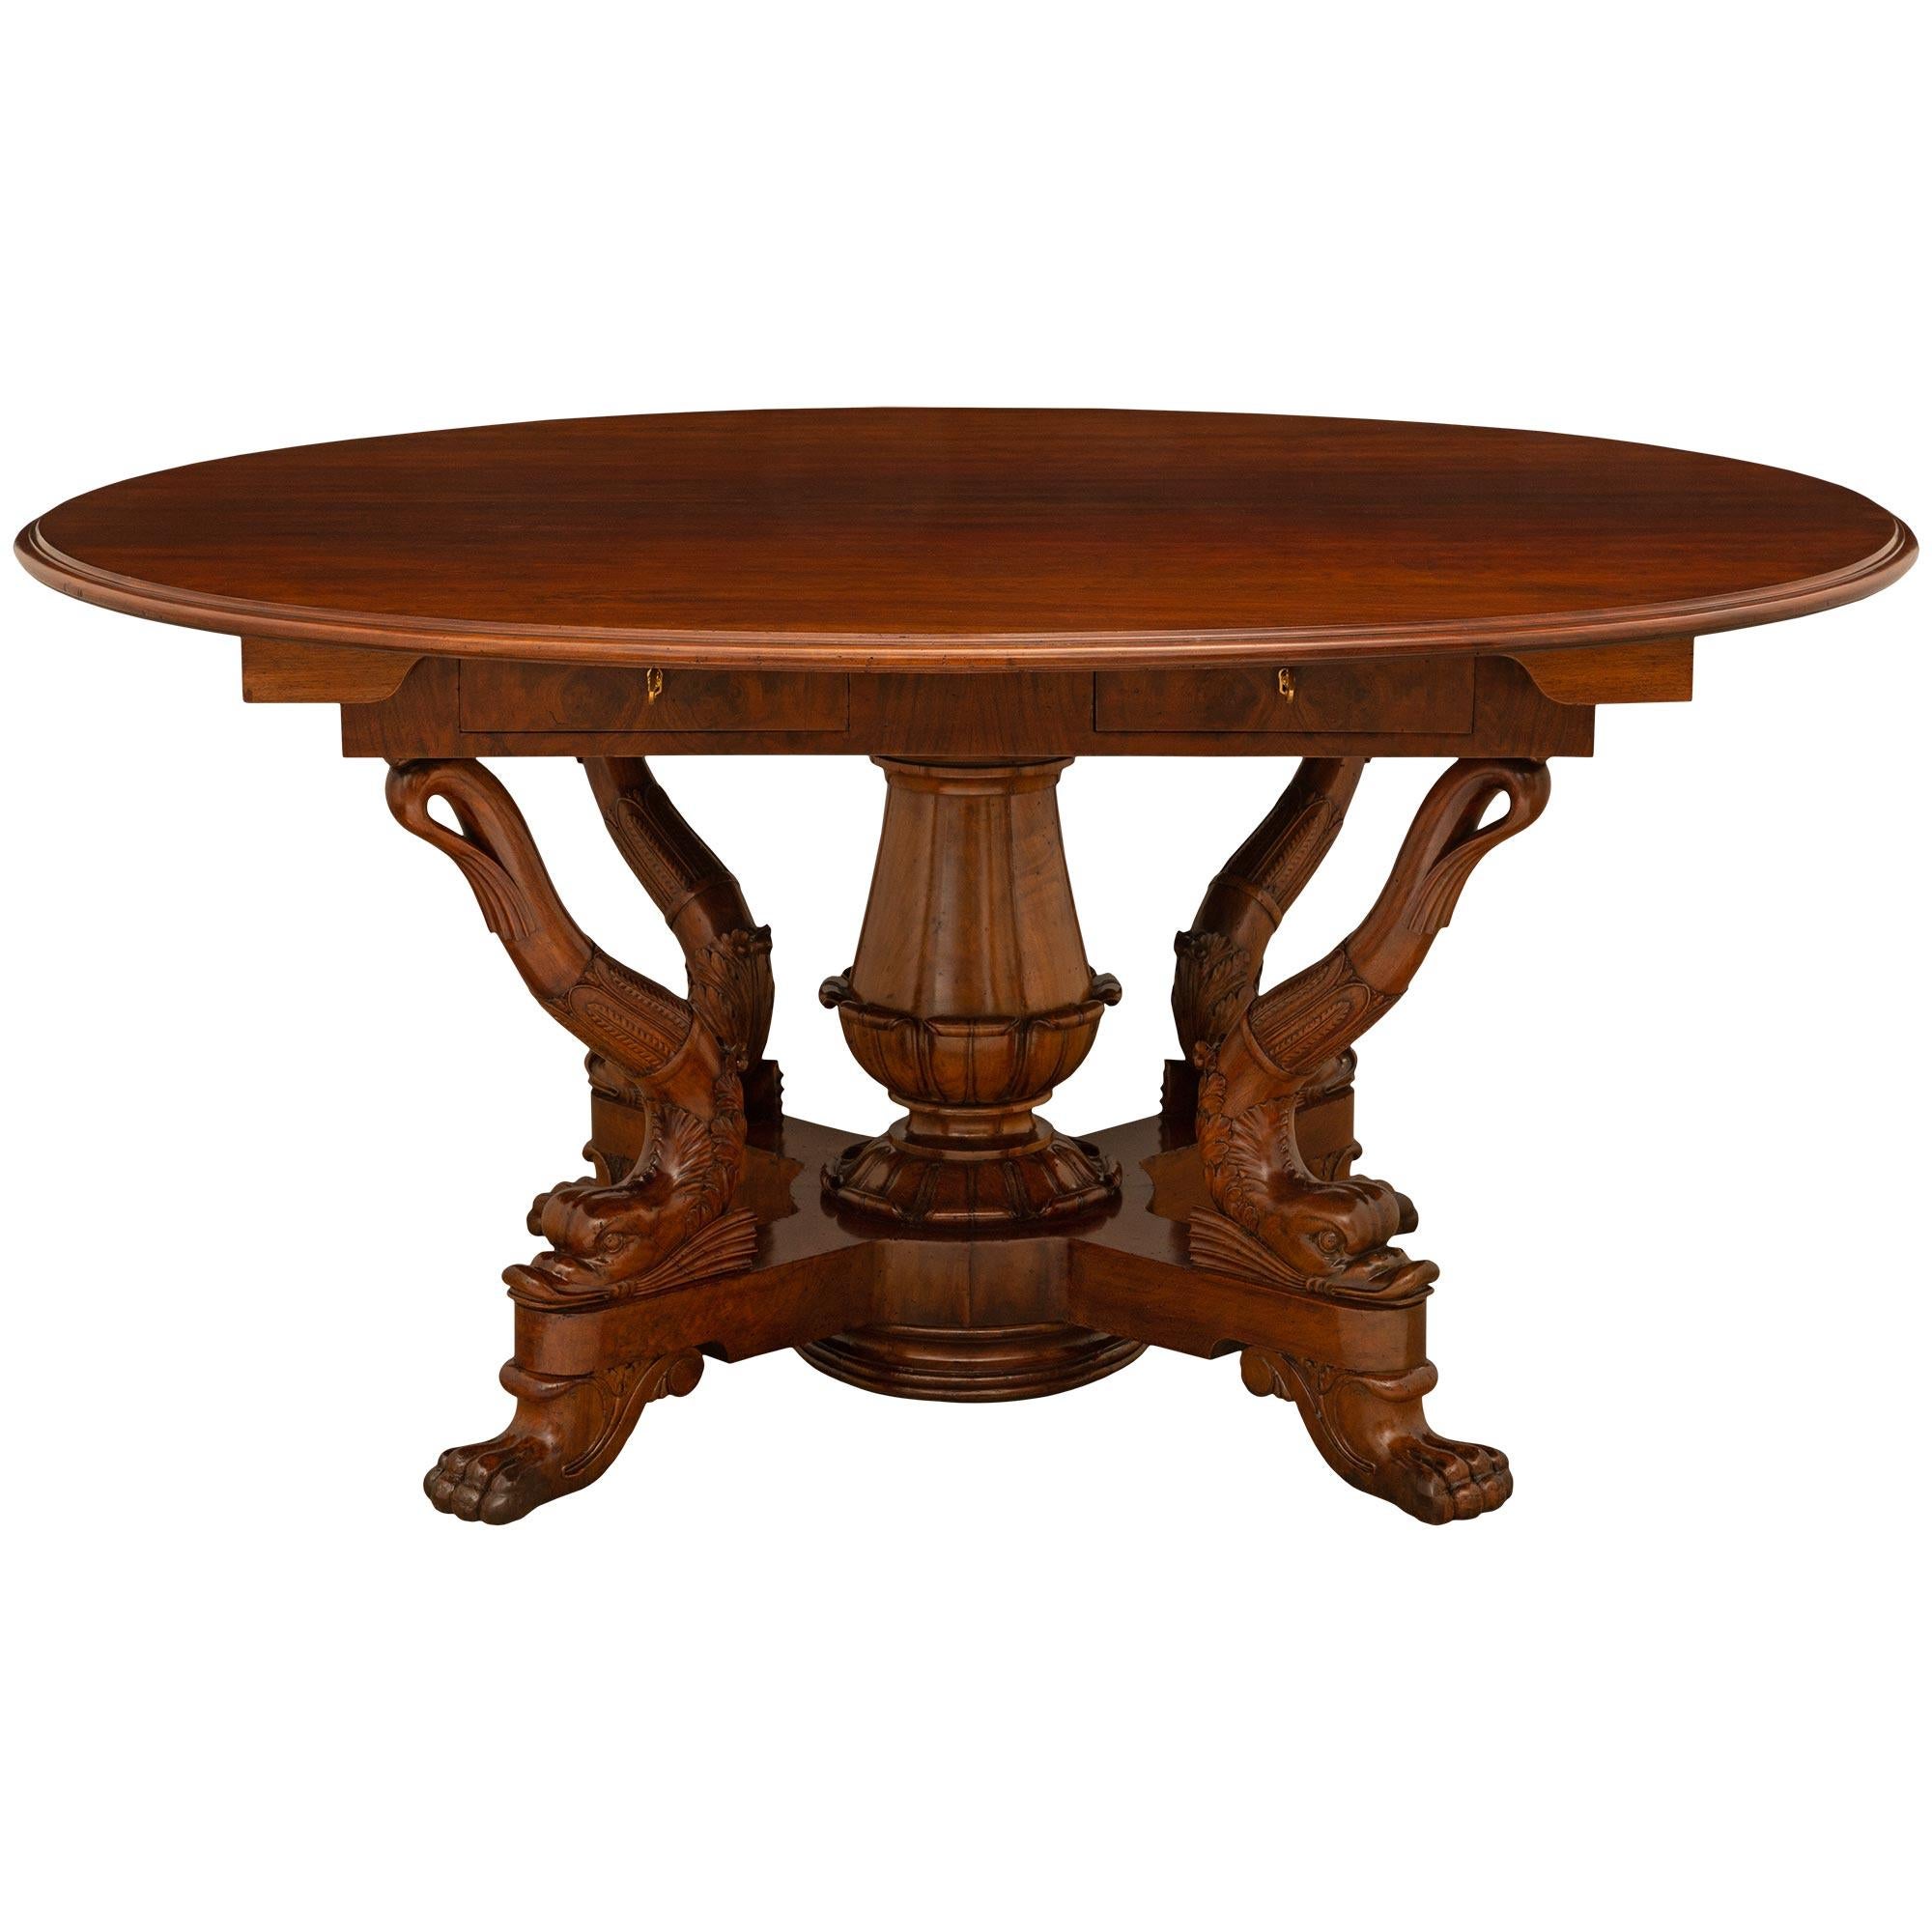 Italian 19th Century Genovese St. Charles X Period Walnut Center/Dining Table In Good Condition For Sale In West Palm Beach, FL